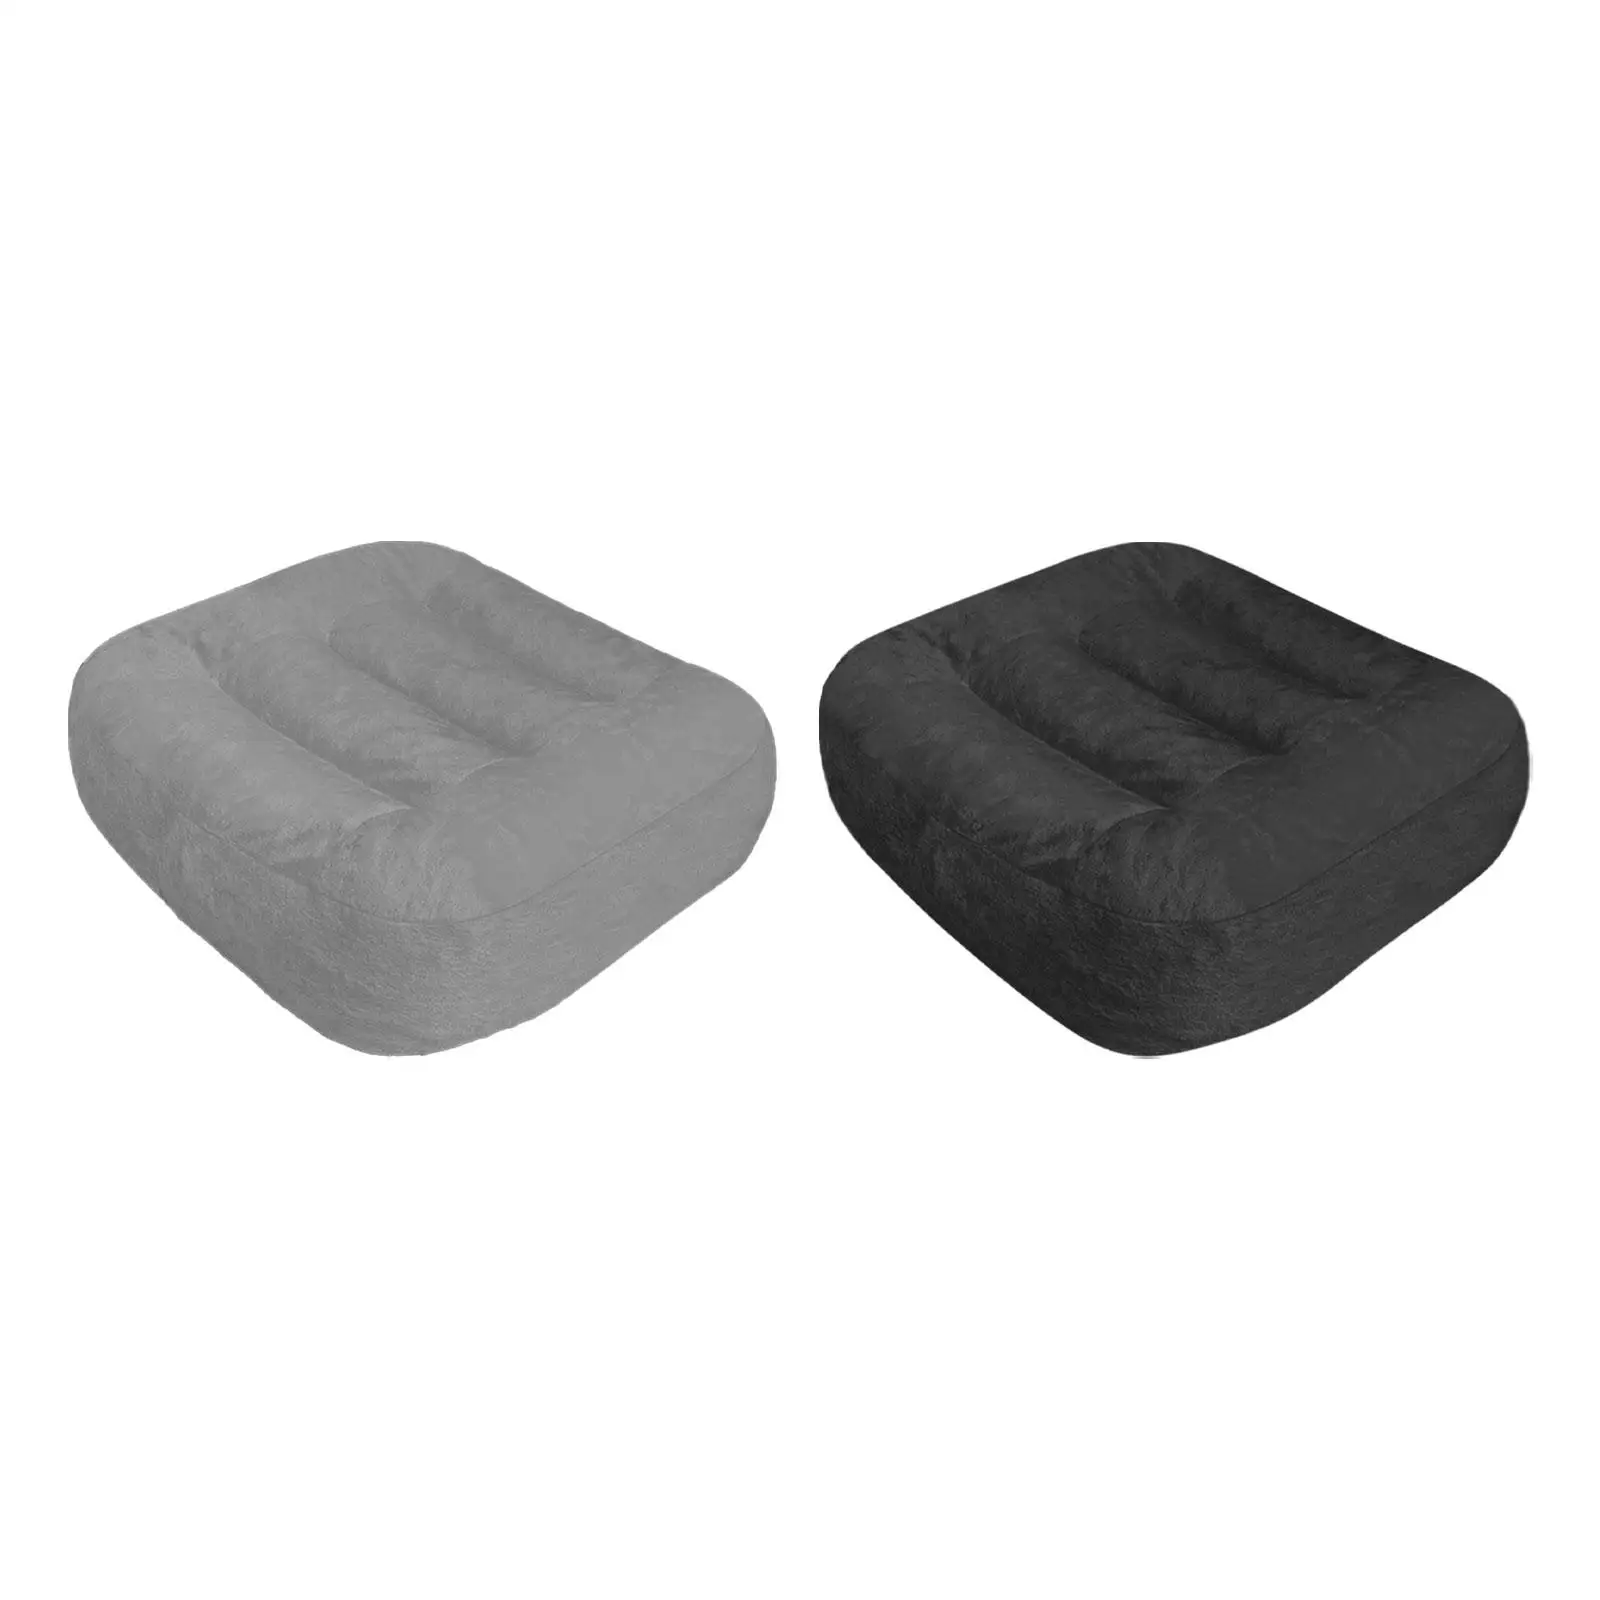 Car Booster Seat Cushion Short People Comfortable Raise The Height Driver Seat Cushion Car Seat Pad for Home Office Chairs